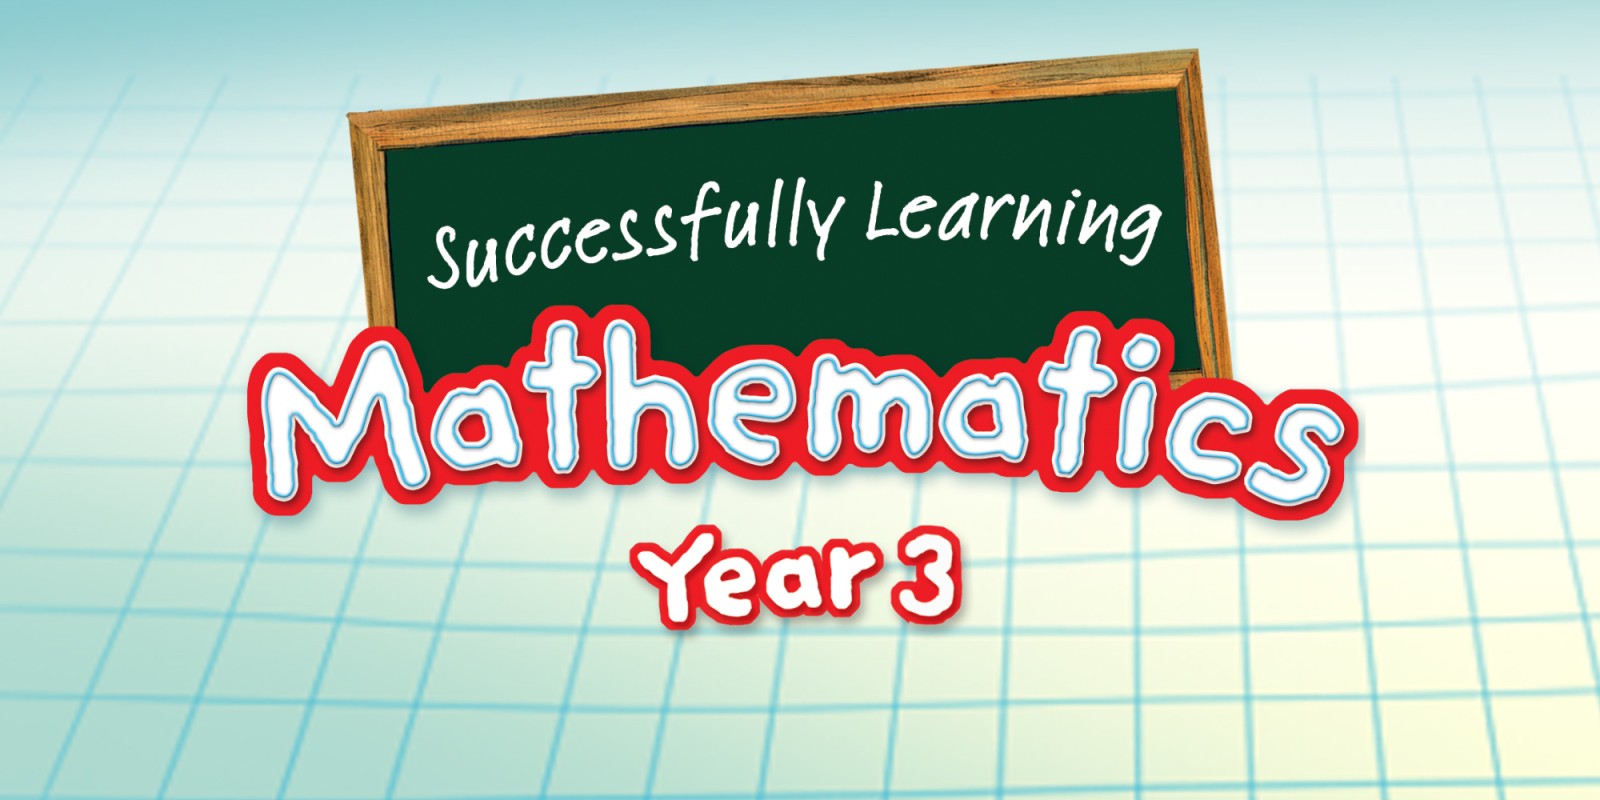 Unique learning. Successfully Learning Mathematics. Mathmatics Learning. ELEARNING математика 3. Math for year 3.